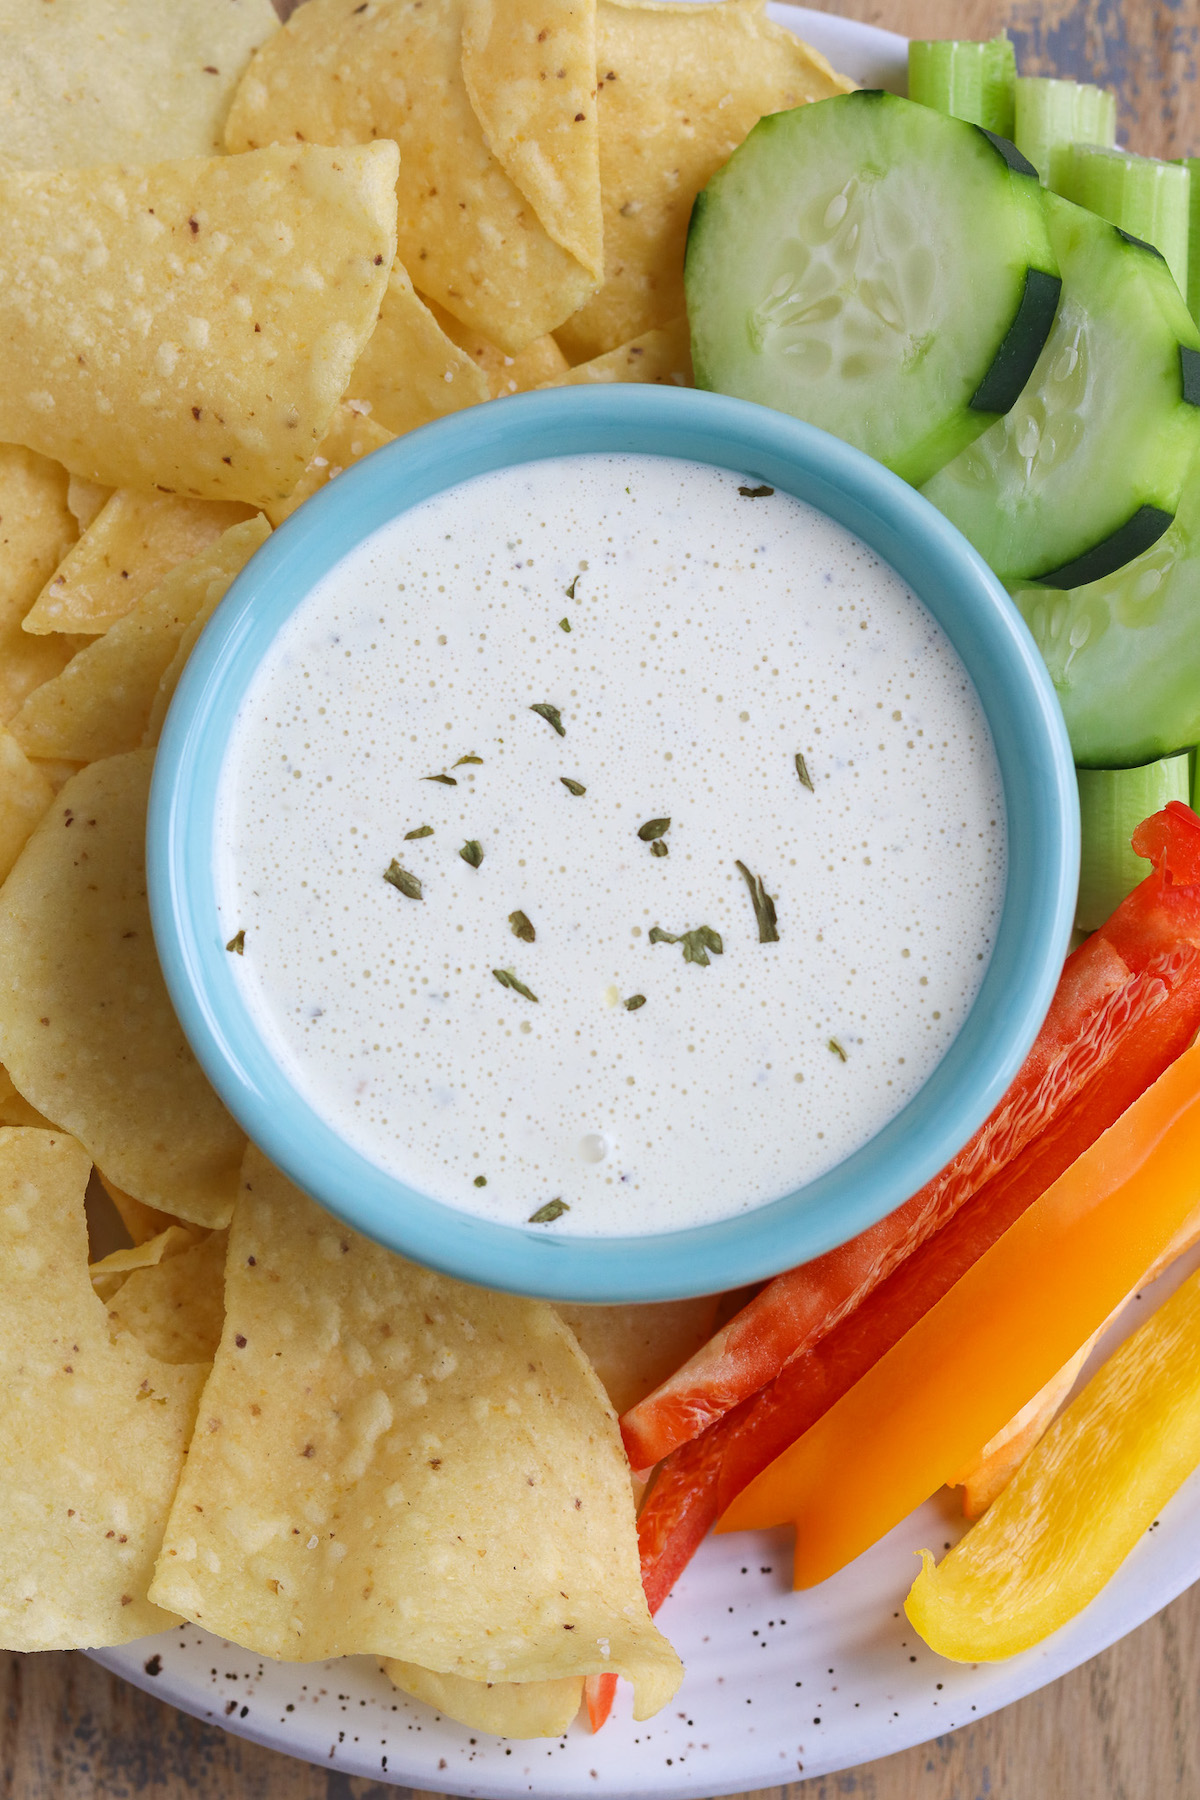 bowl of prepared dip with chips and veggies